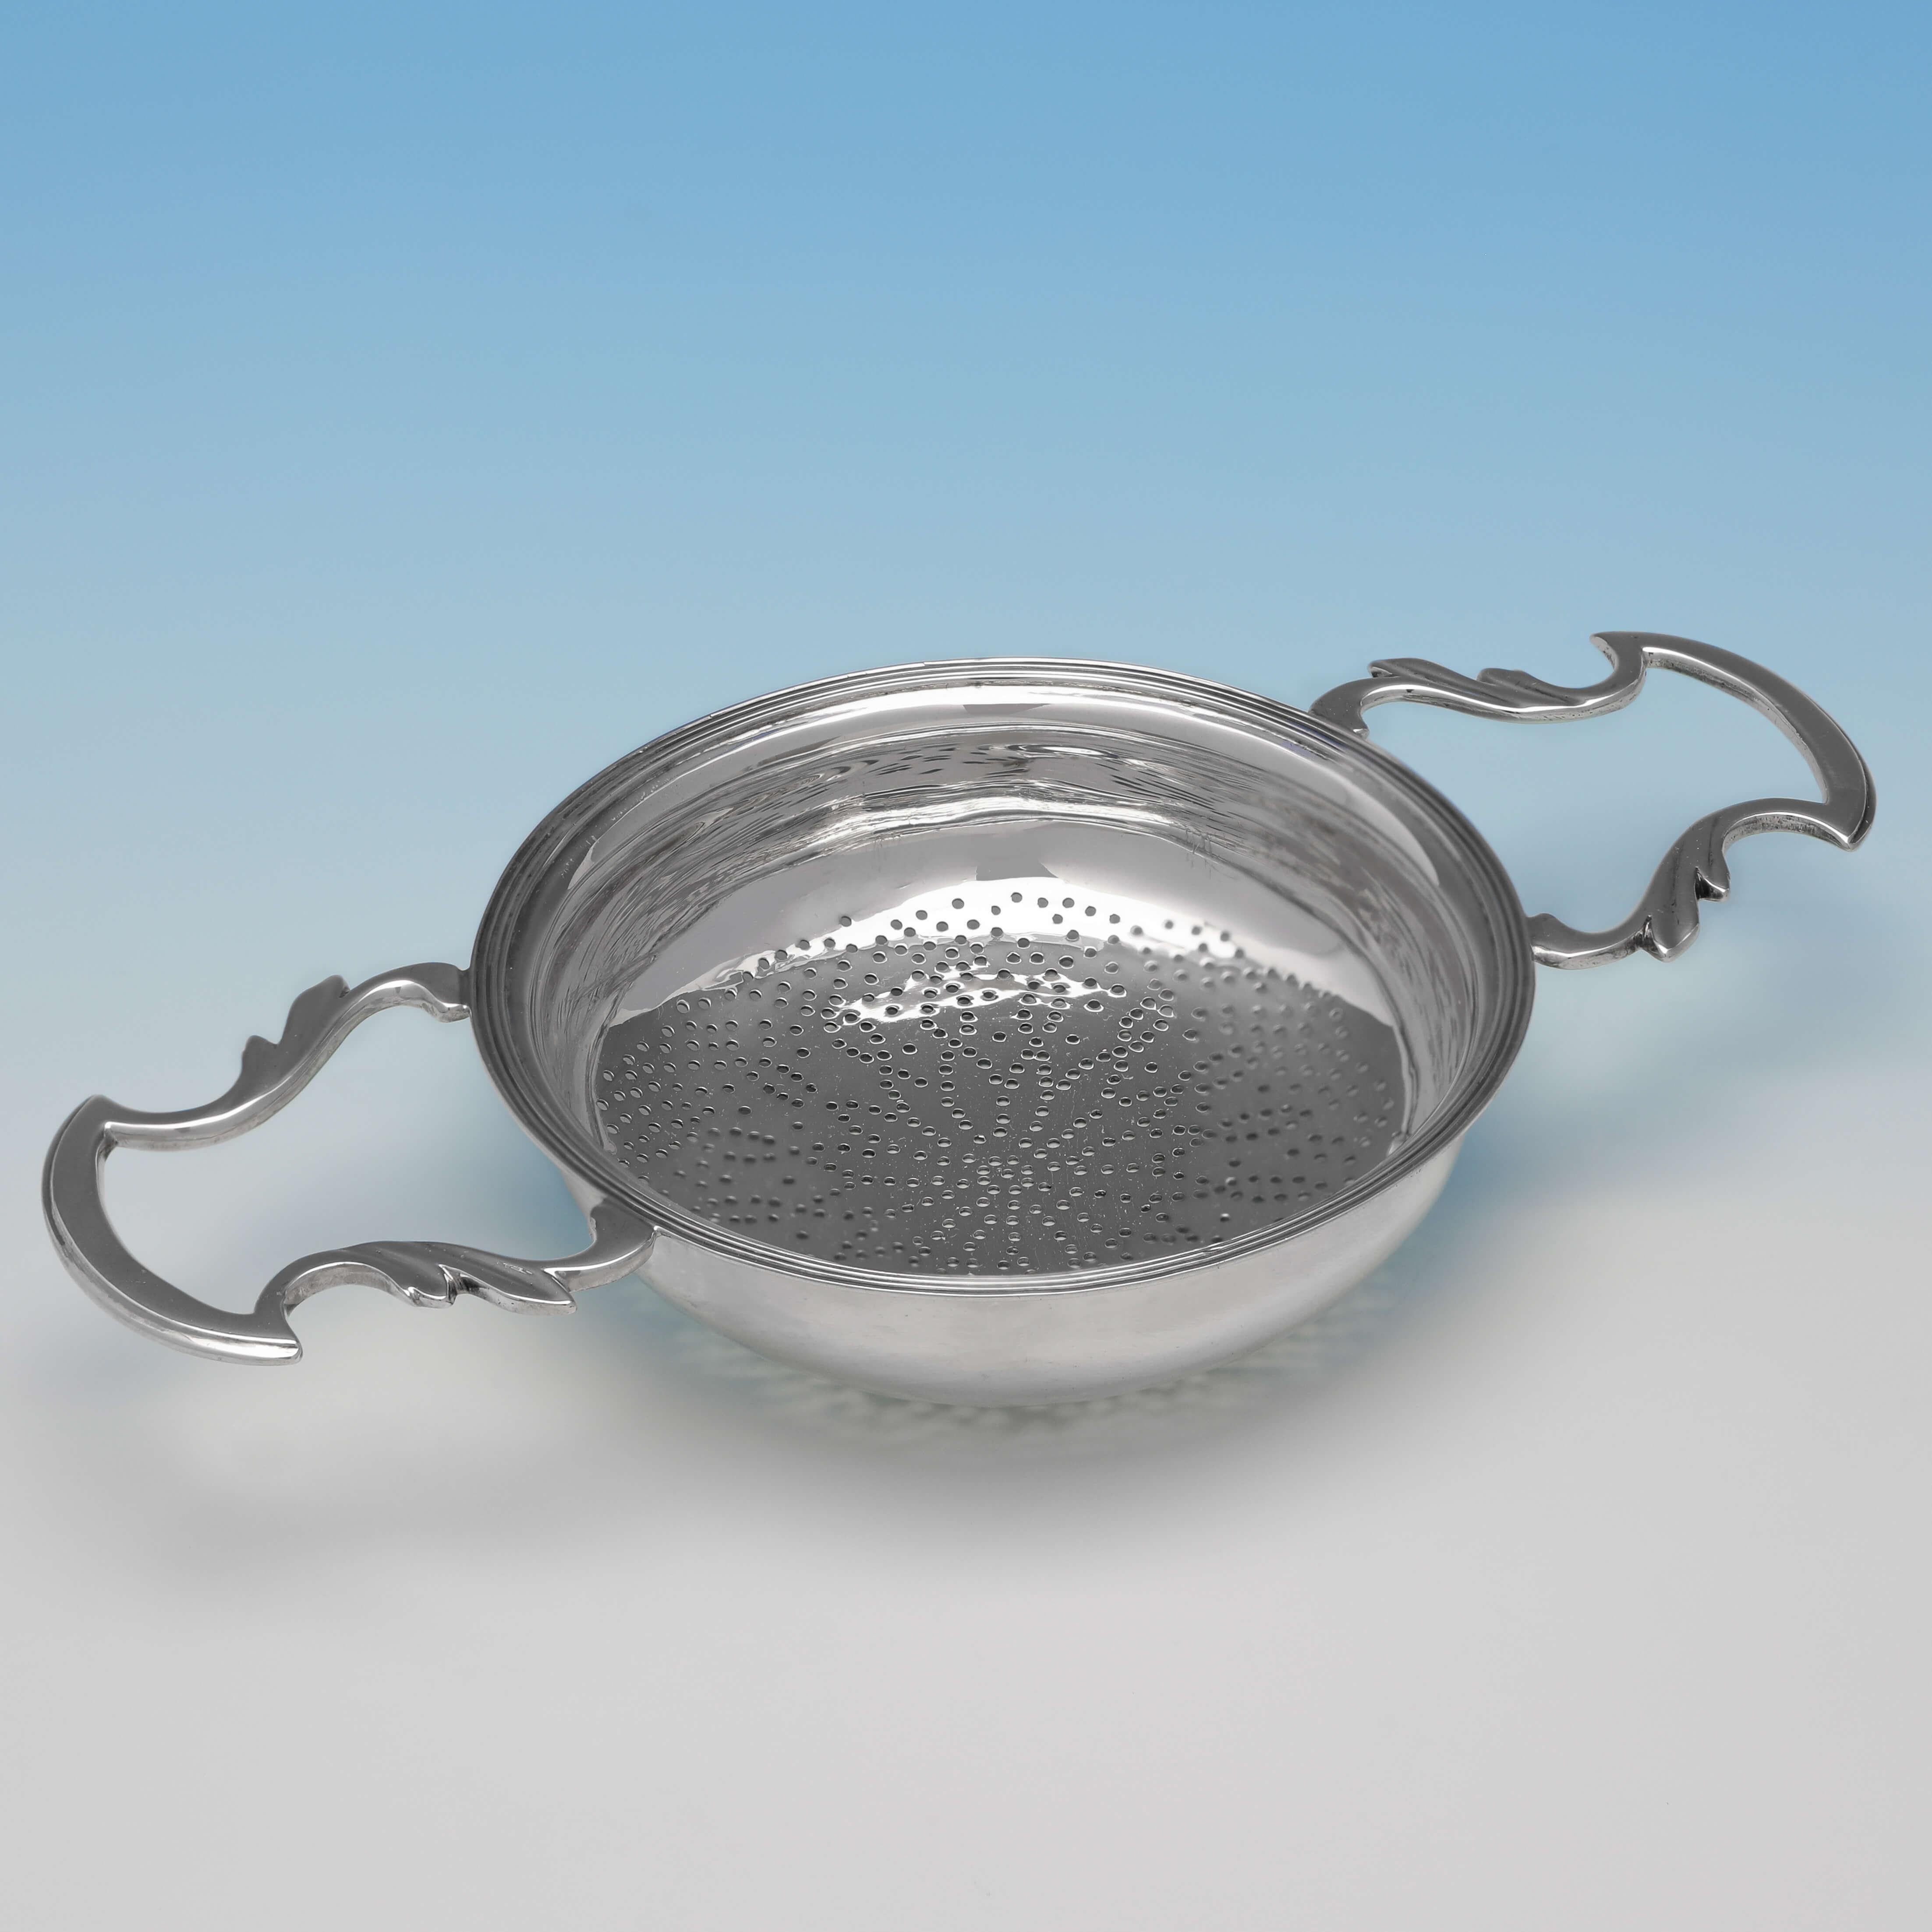 Hallmarked in London in 1922 by Goldsmiths & Silversmiths Co., this handsome, sterling silver lemon strainer, is in the style of a George II example. The lemon strainer measures 1.25